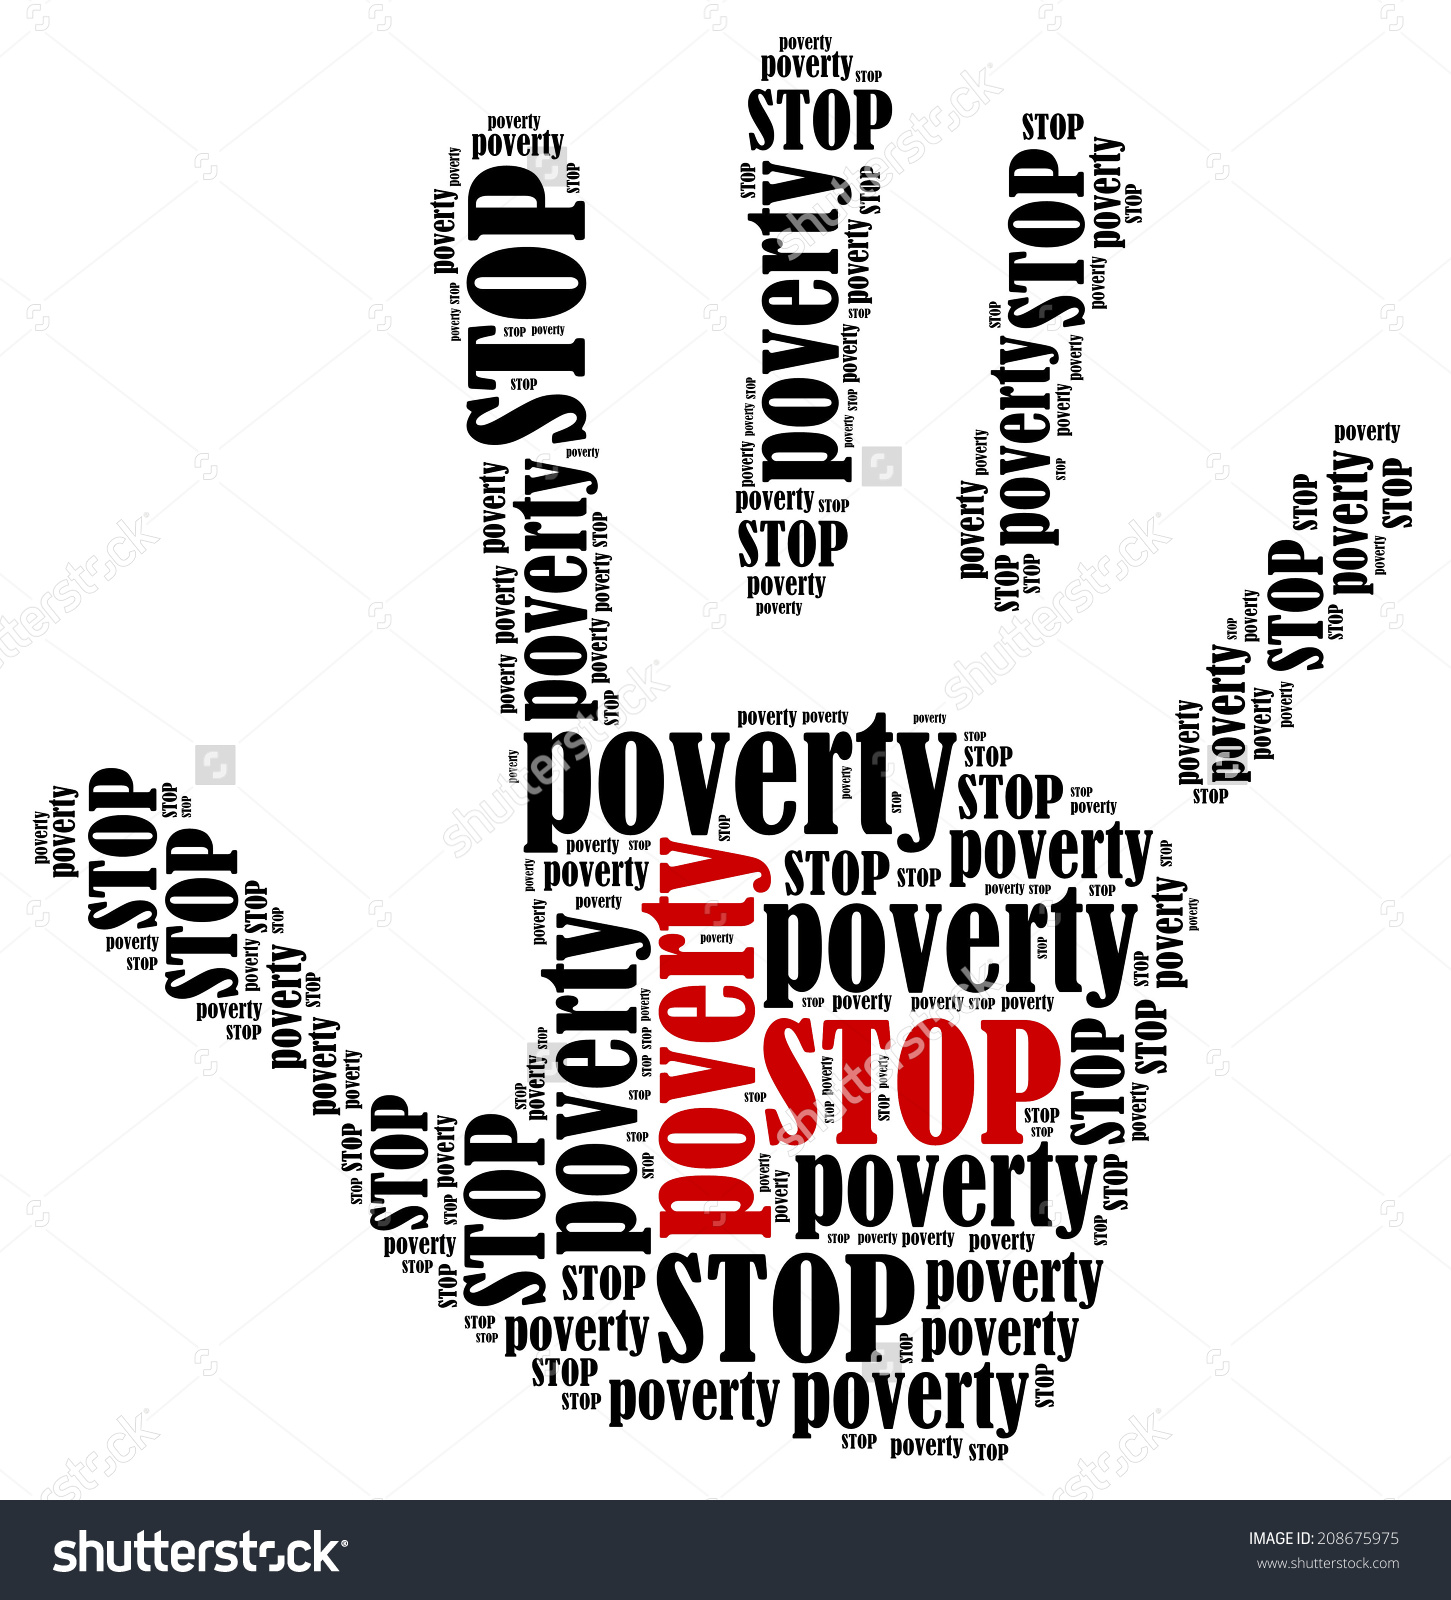 poverty clipart end poverty